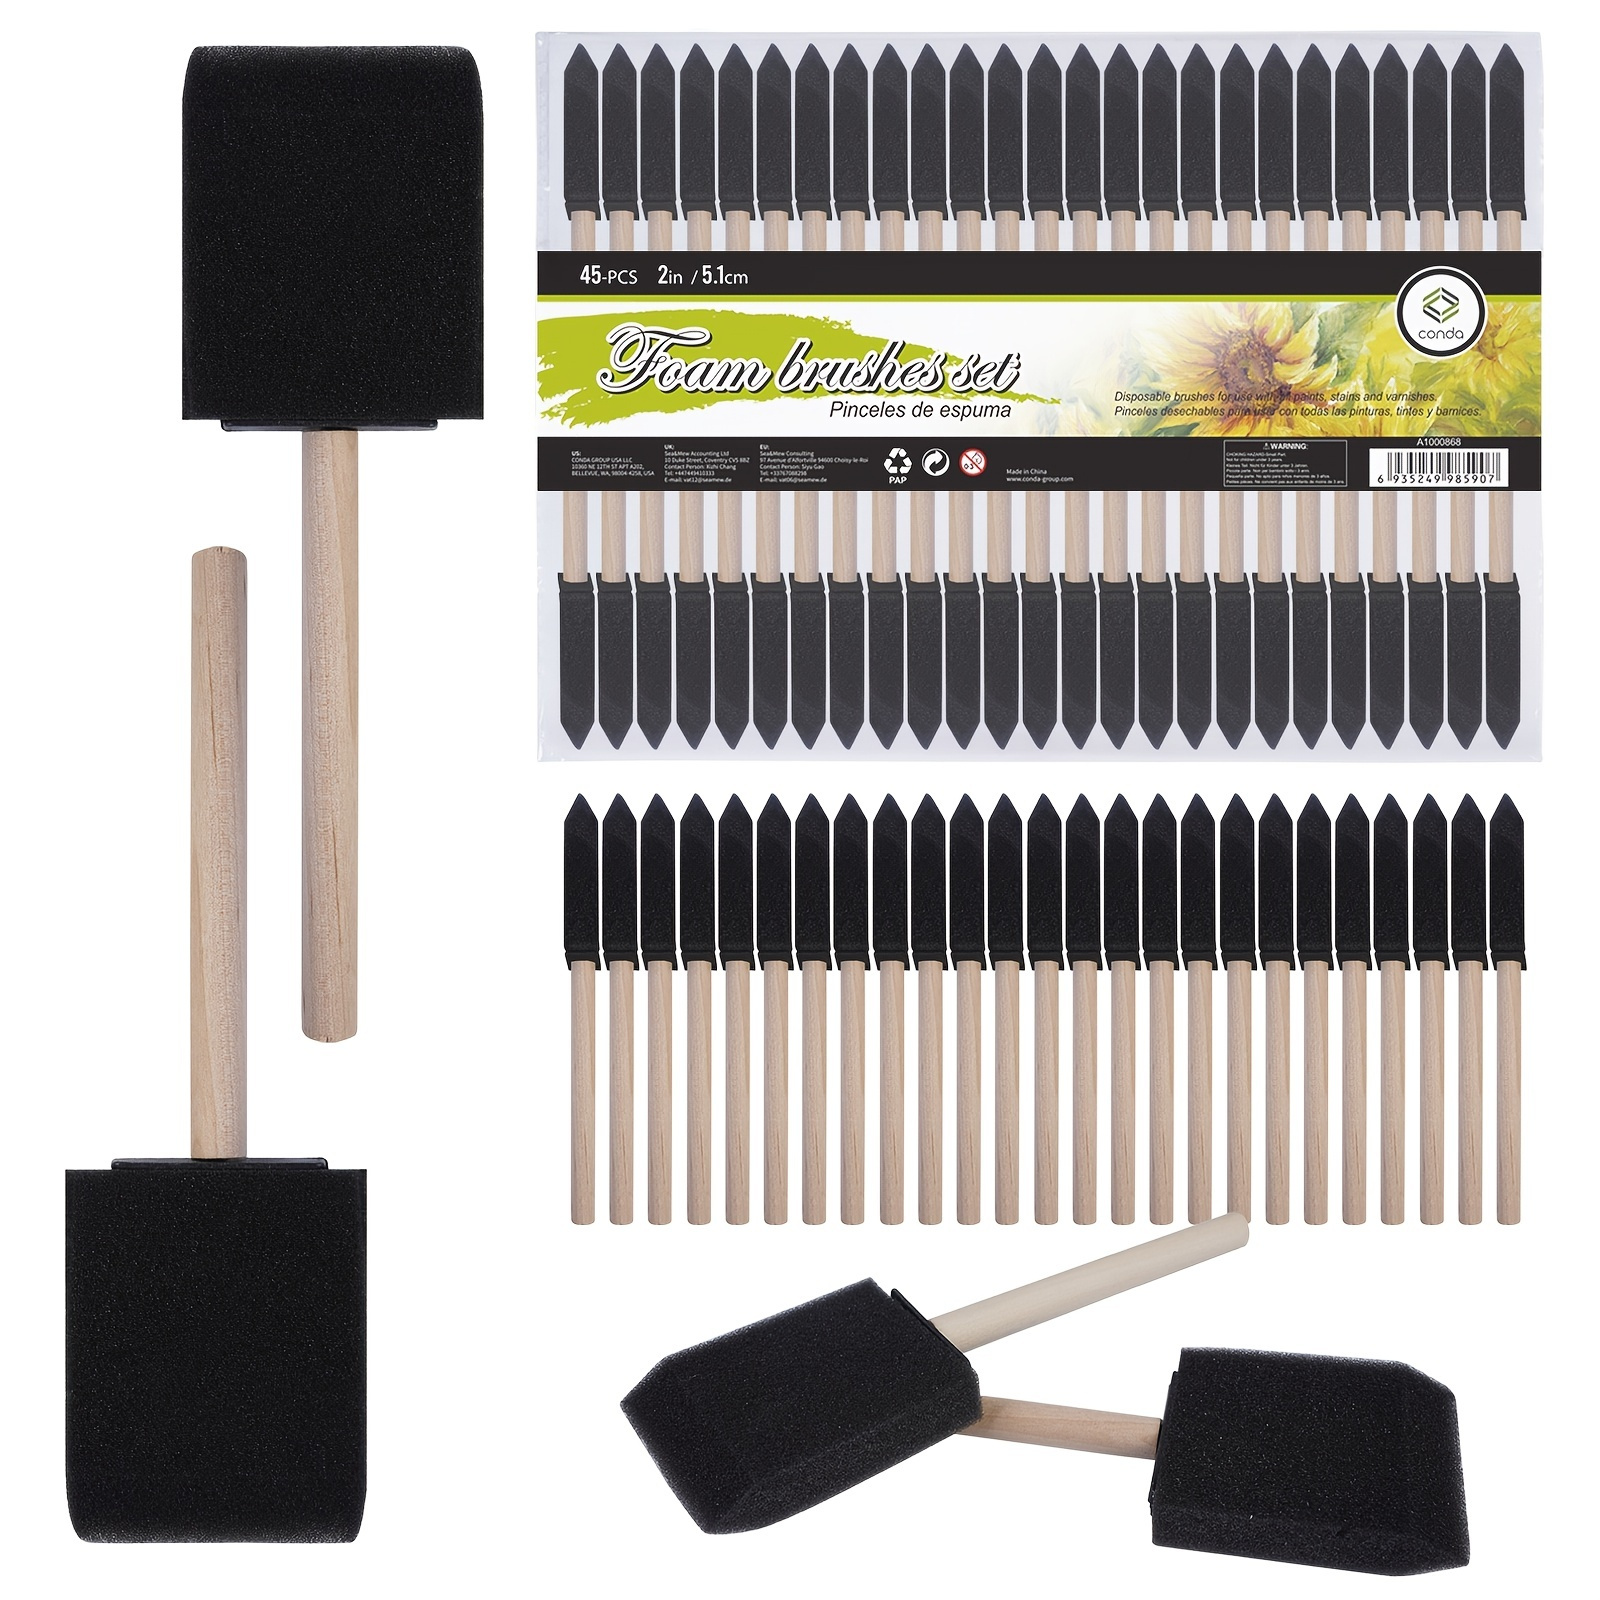 

Conda 45 Packs 2 Inch Assorted Foam Brush Set Wood Handle Paint Brush Set- Lightweight, Durable, Great For Acrylics, Stains, Varnishes, Crafts